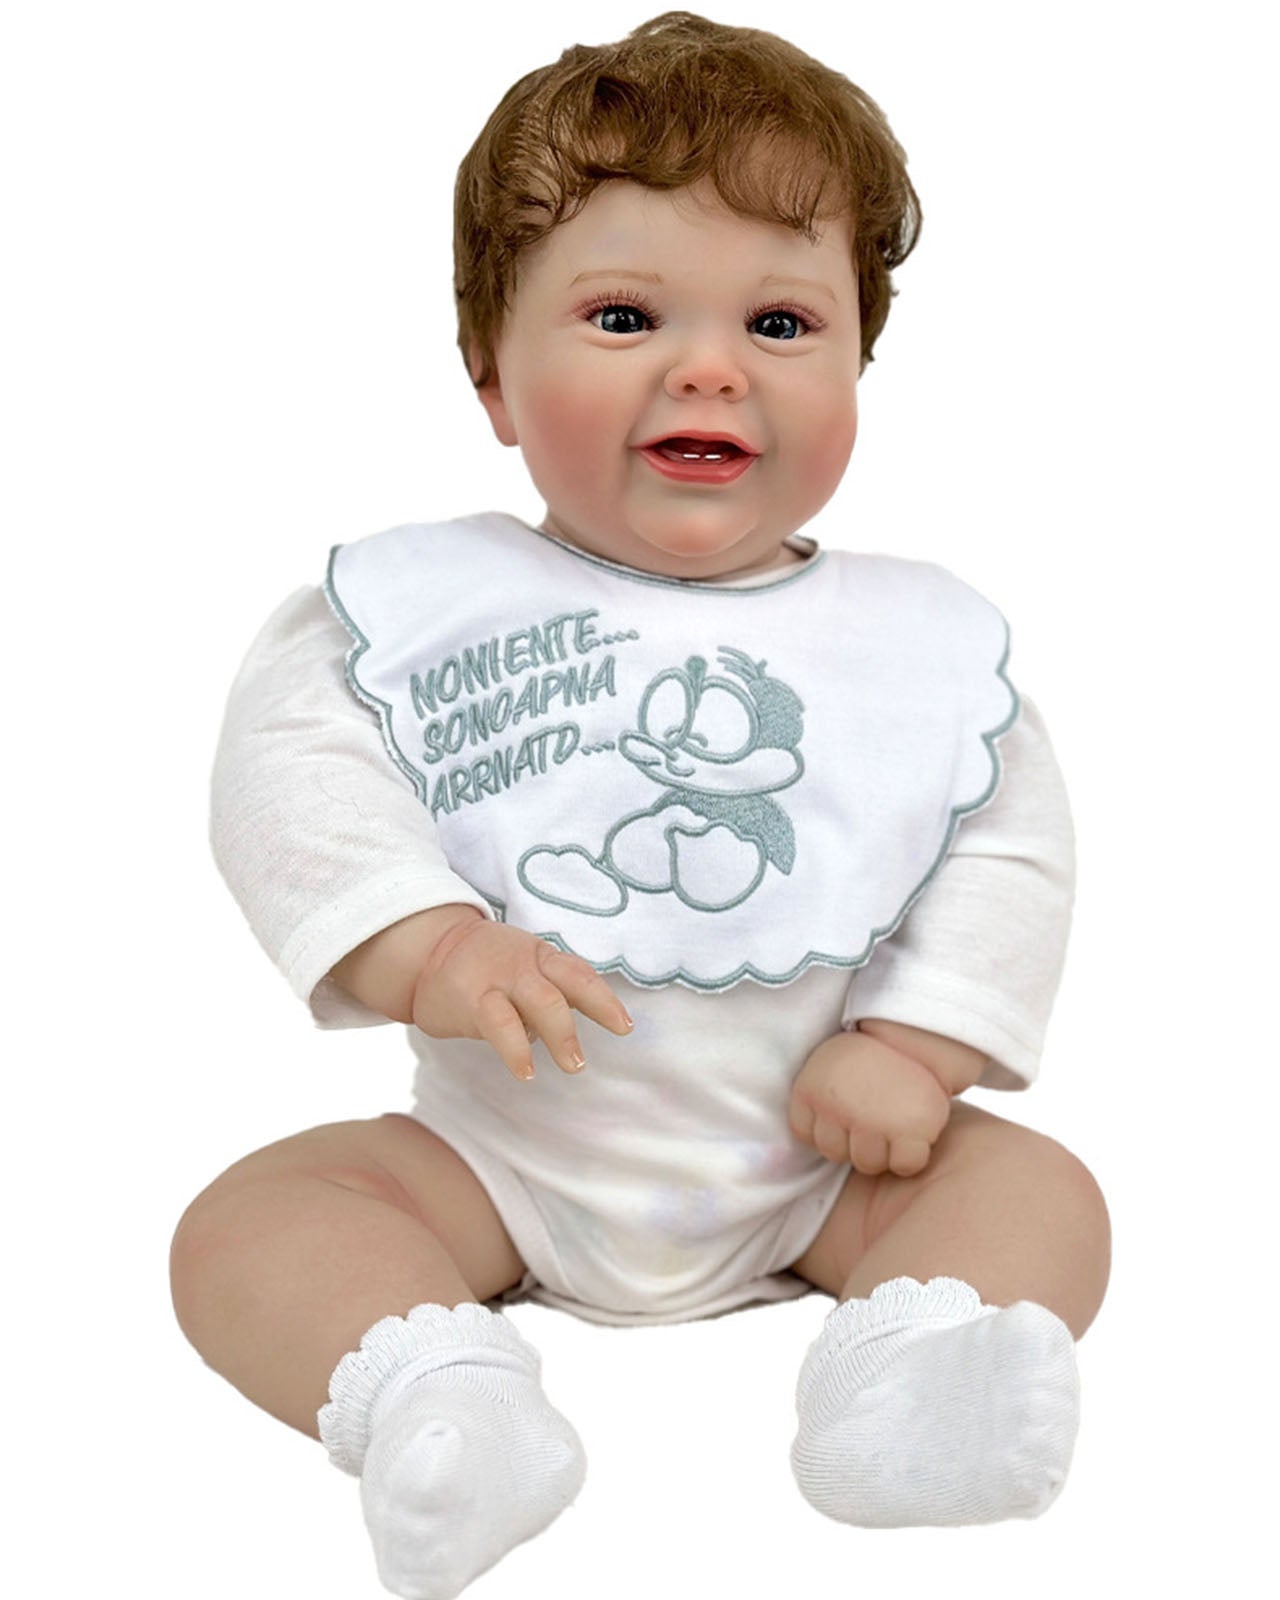 22-inch 1.7 kg Reborn Baby Doll toothy smiling boy - Vacos Store